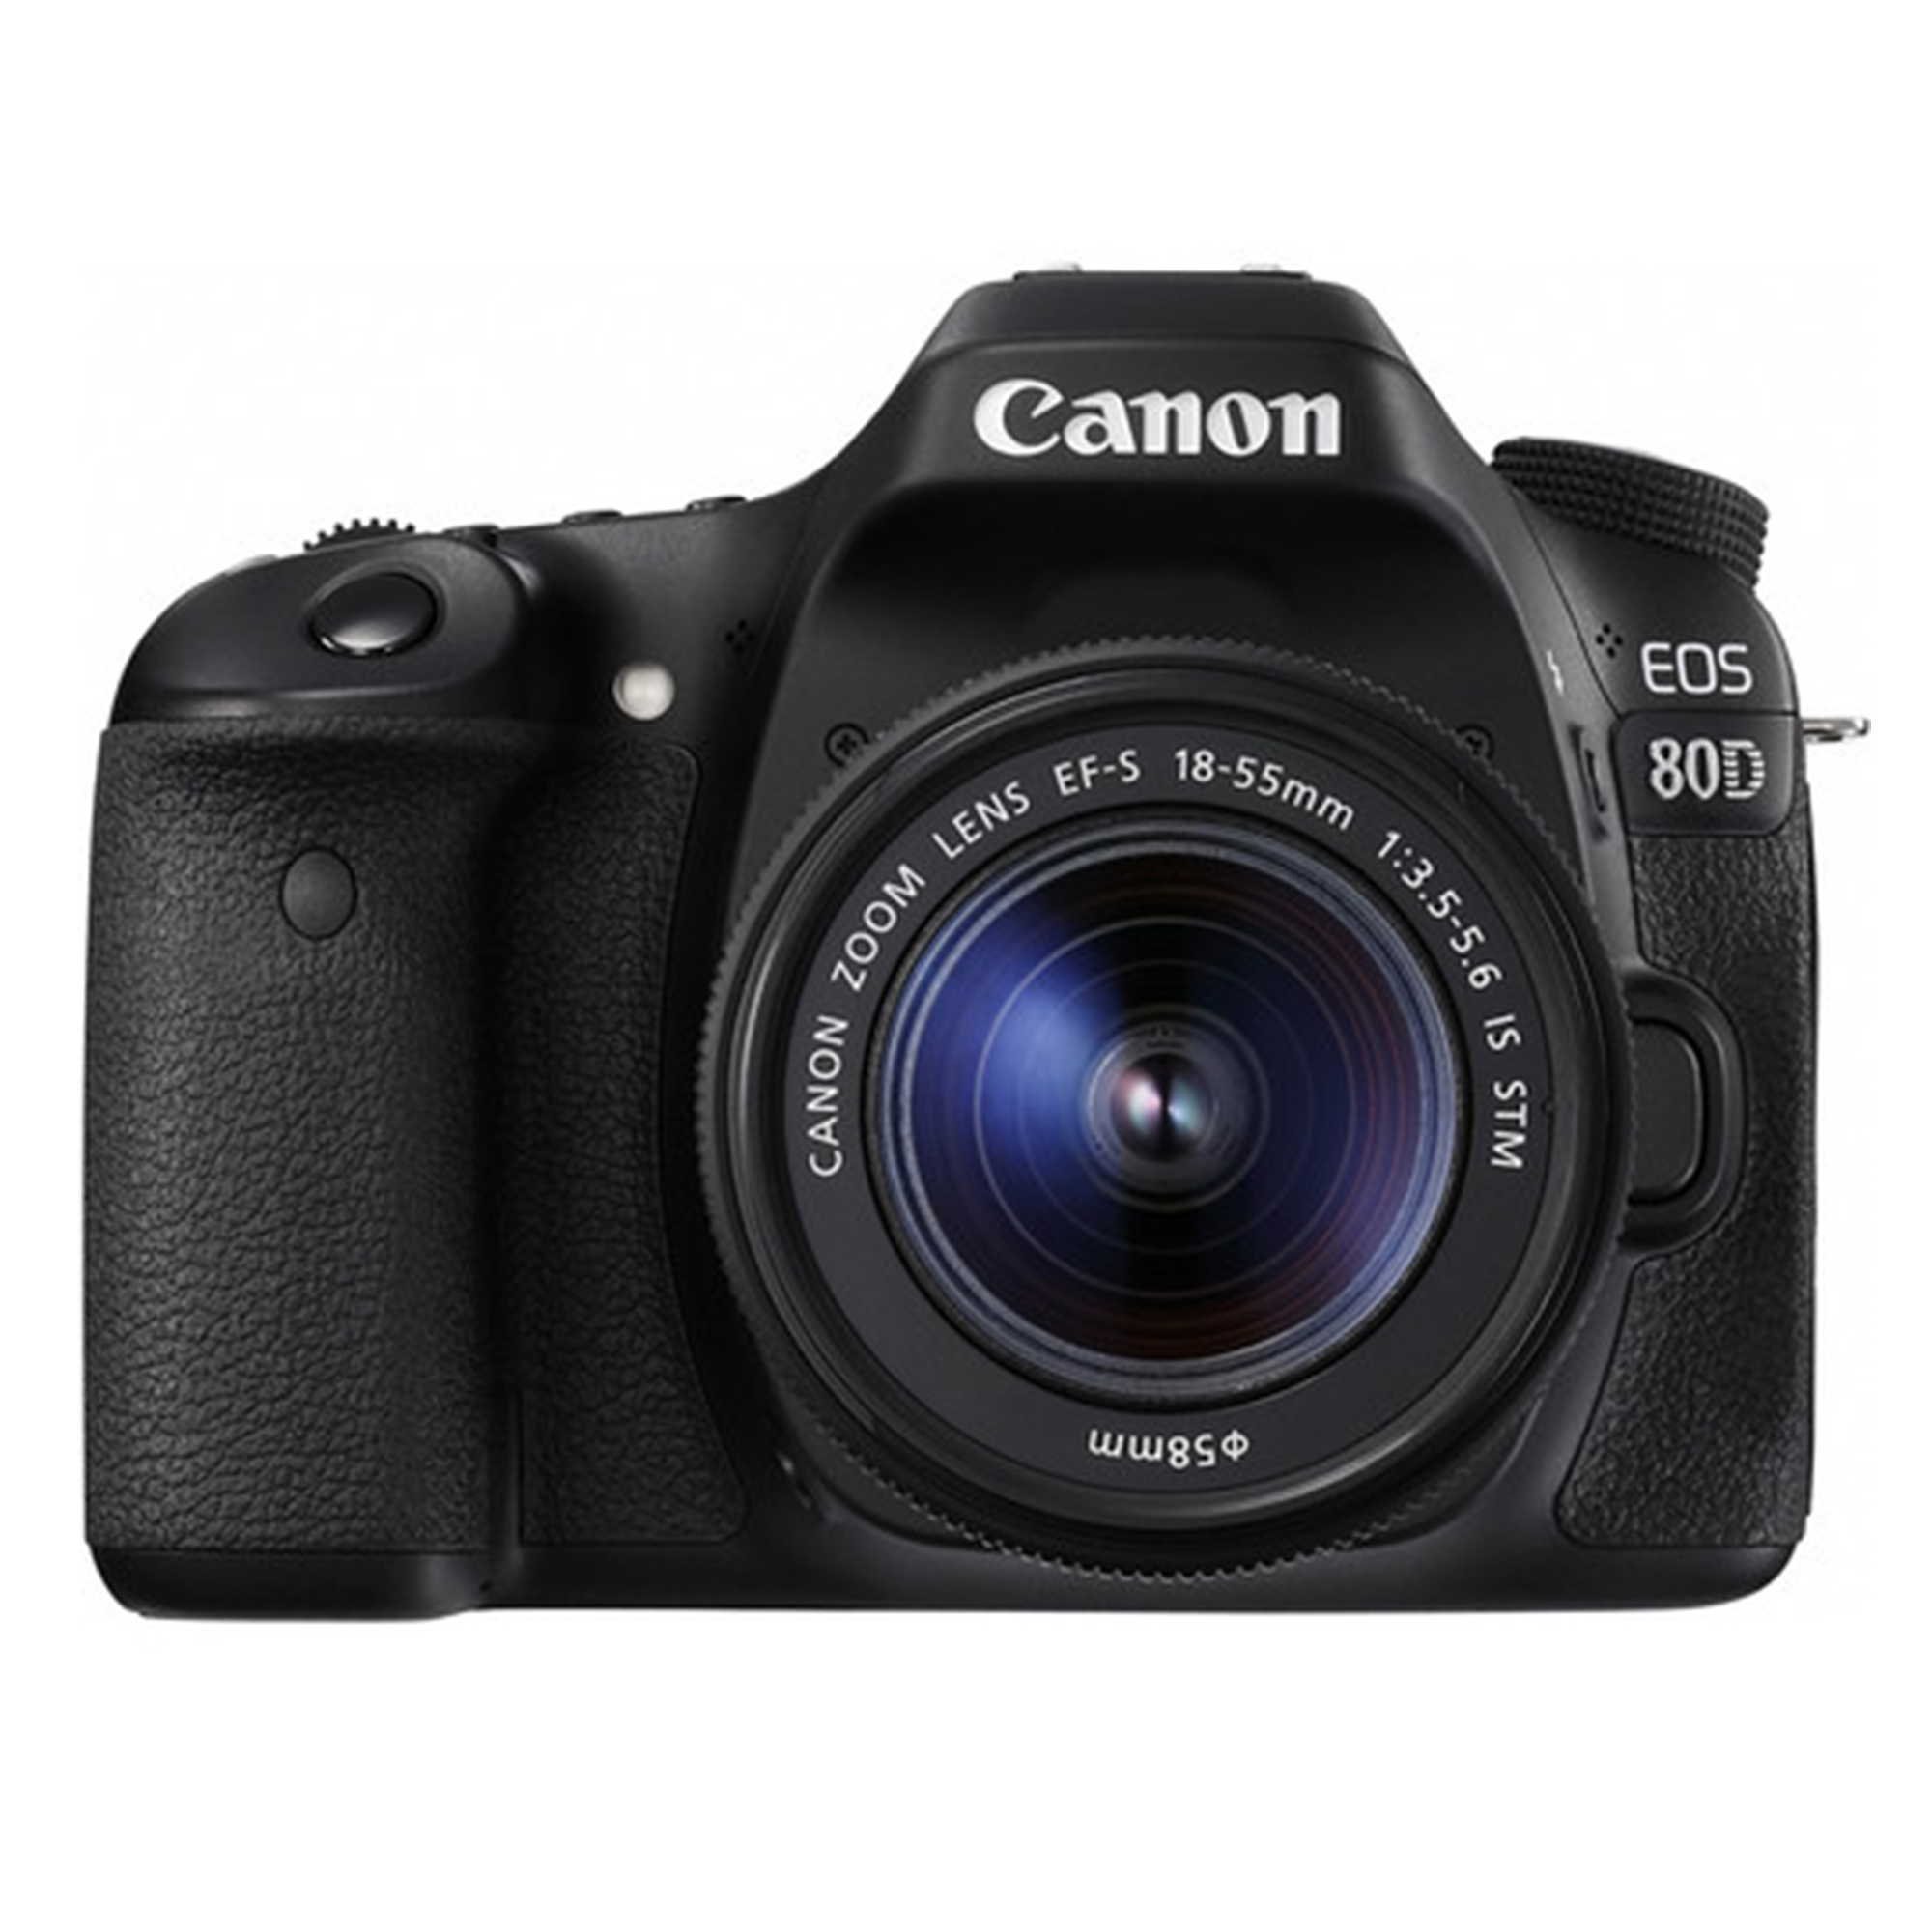 Canon EOS 80D DSLR Camera with 18-55 mm Lens